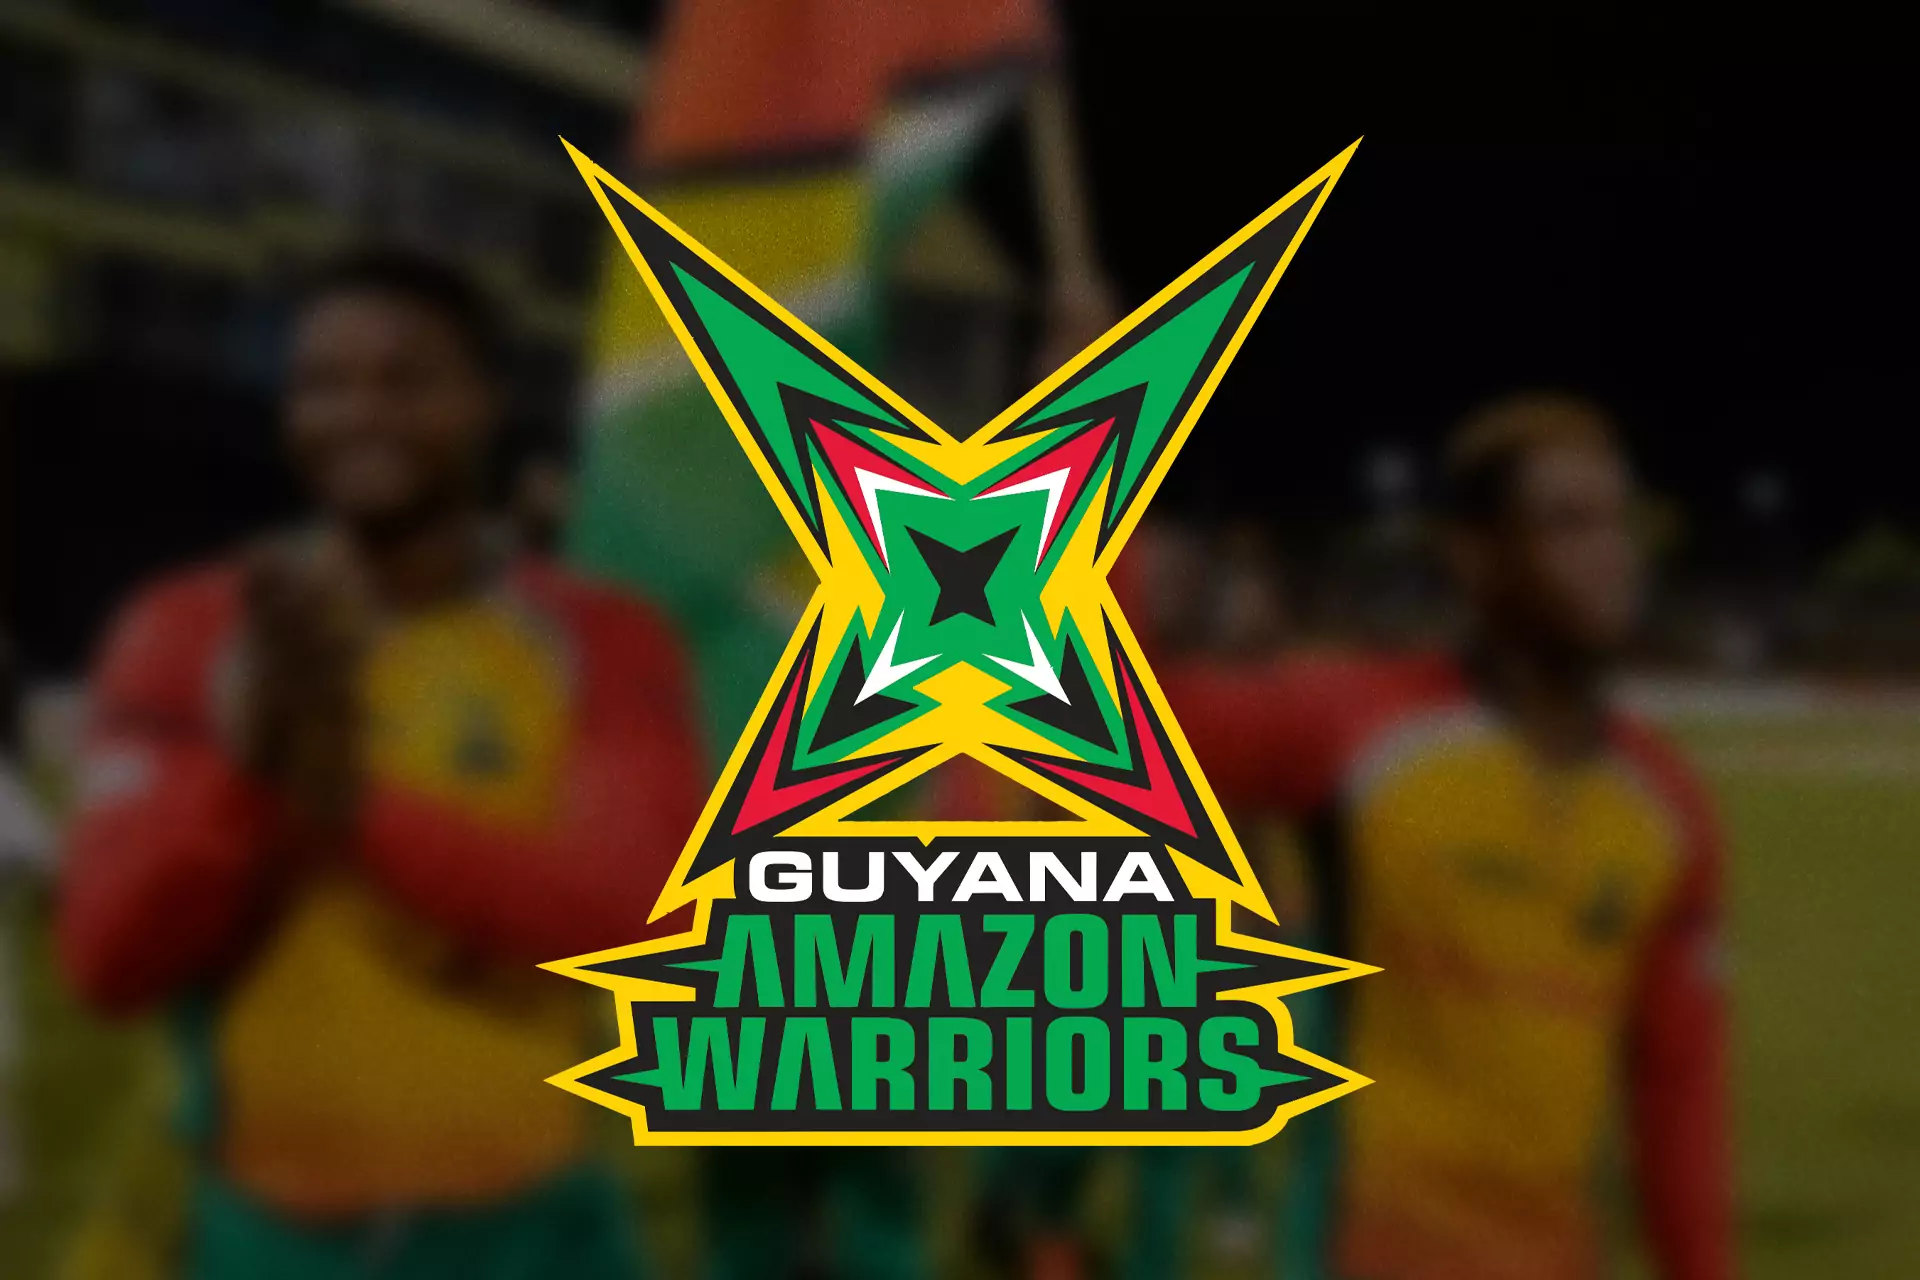 The Guyana Amazon Warriors was held in 2013, the first year of CPL.